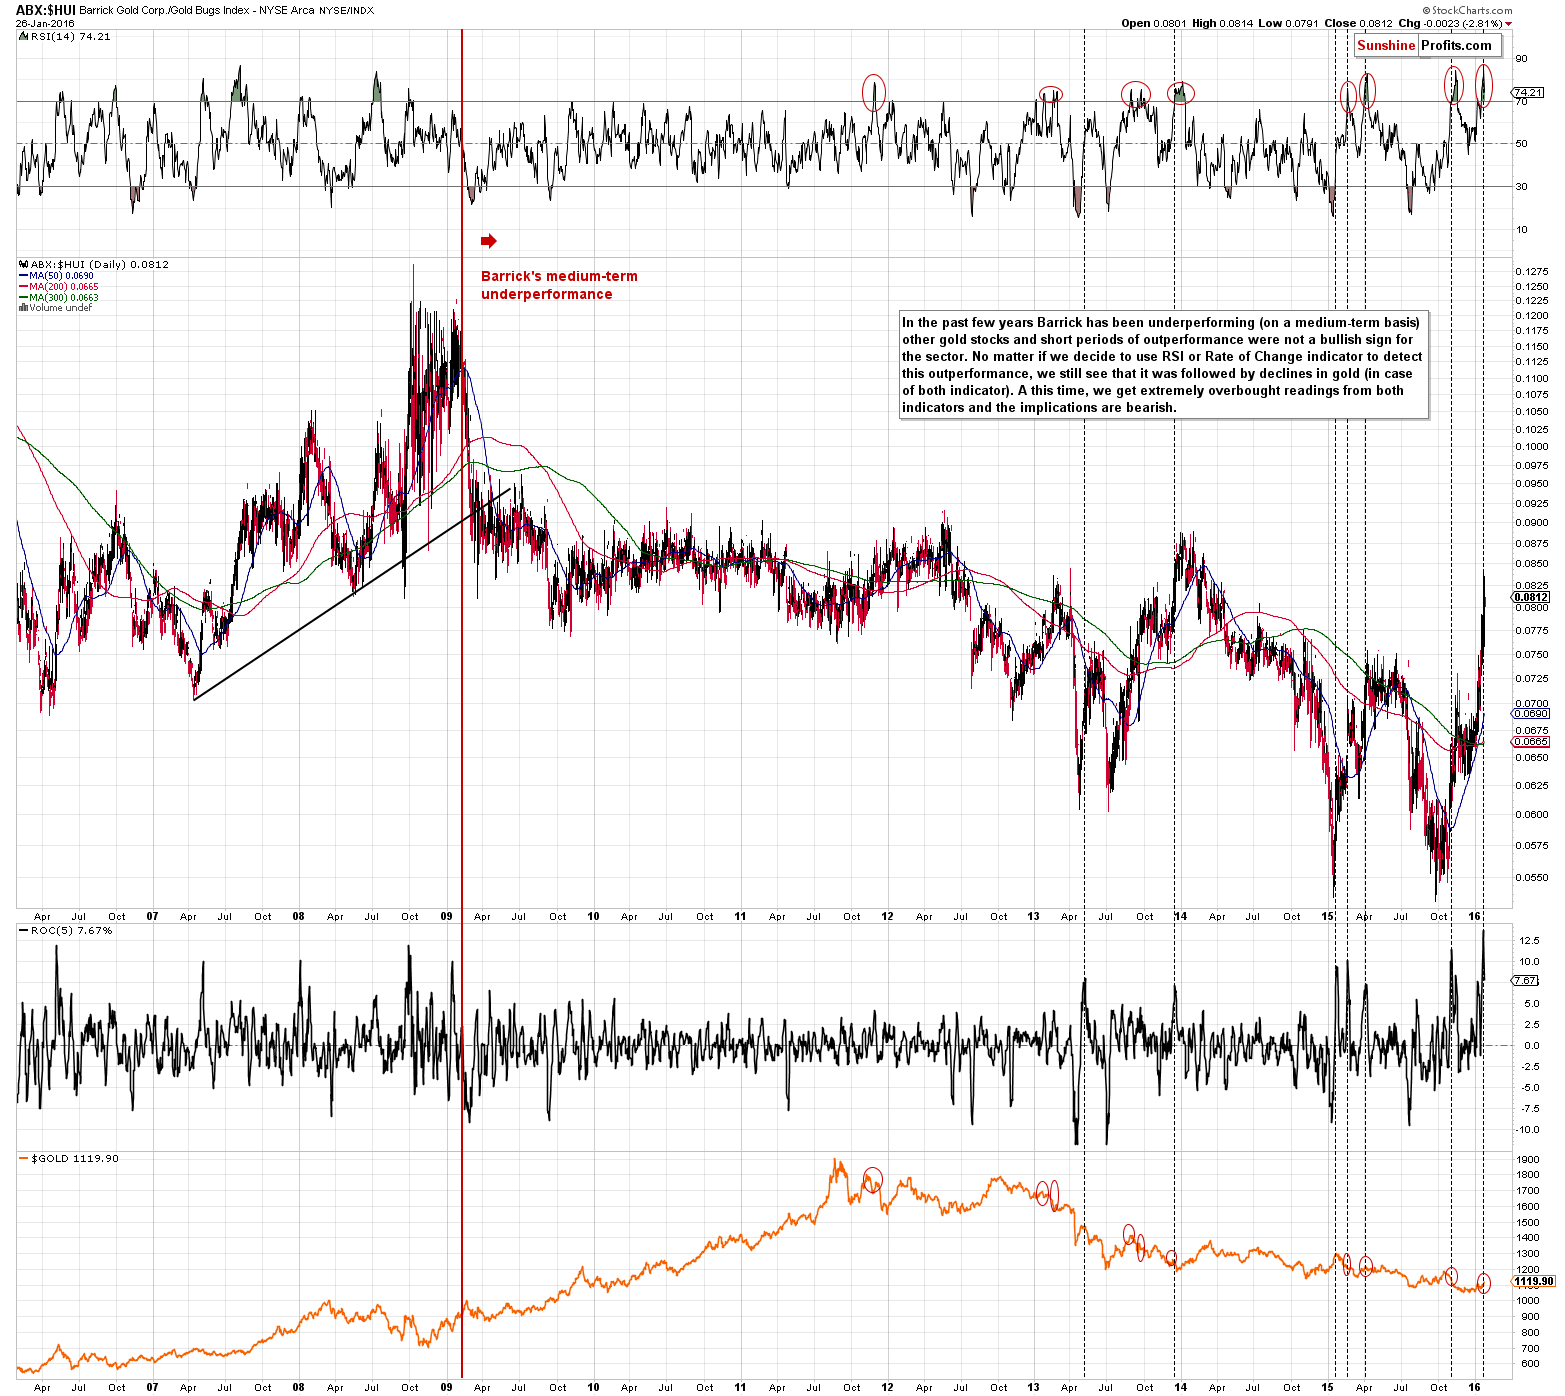 ABX:HUI - Barrick Gold (ABX) to gold stocks ratio chart